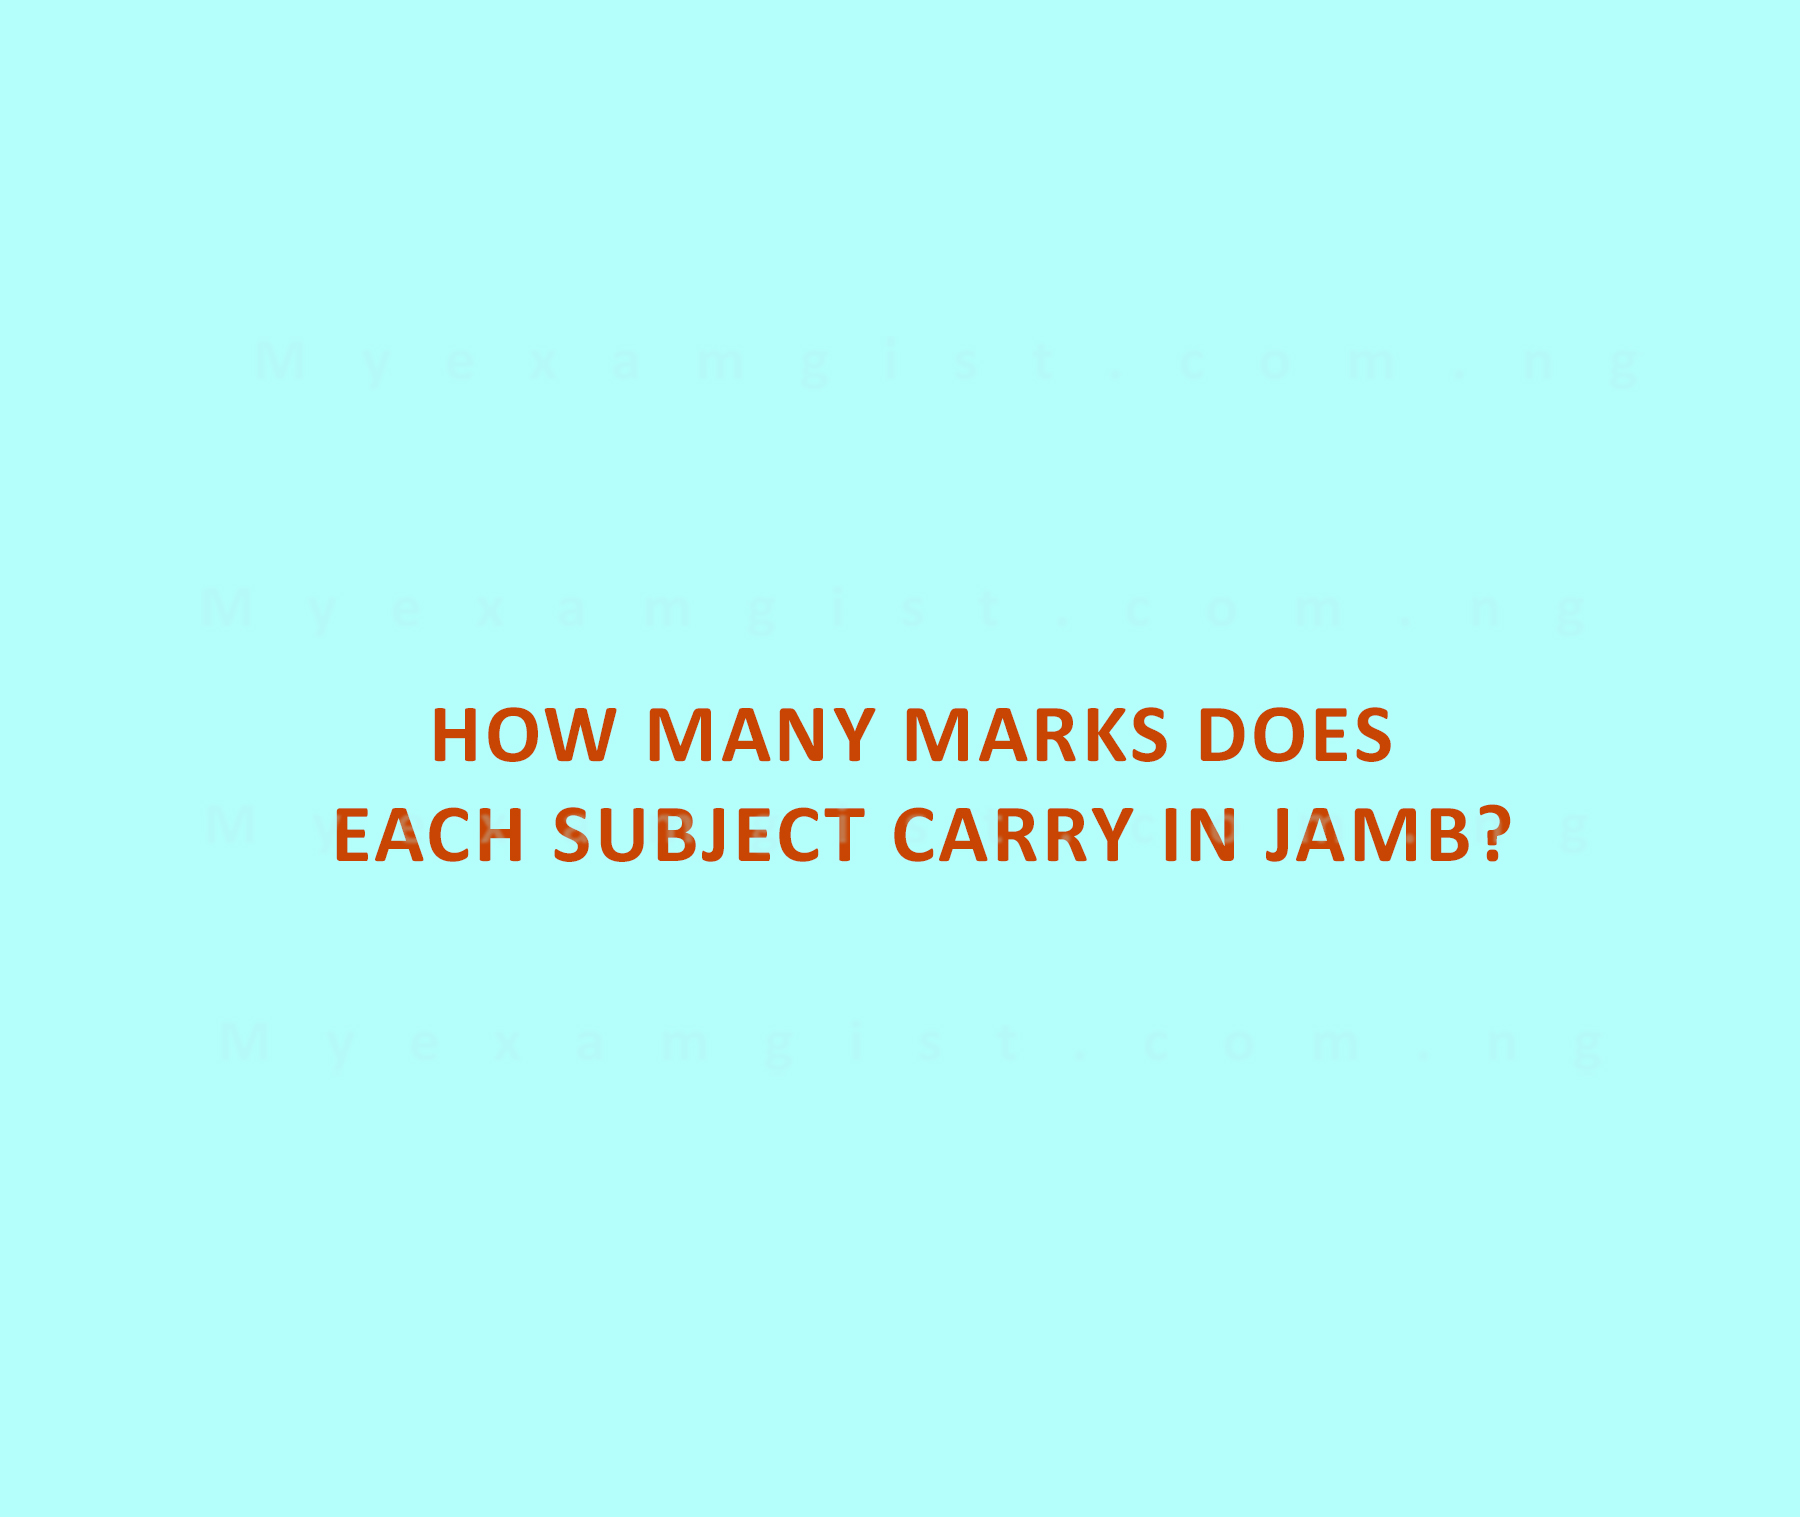 How many marks does each subject carry in jamb